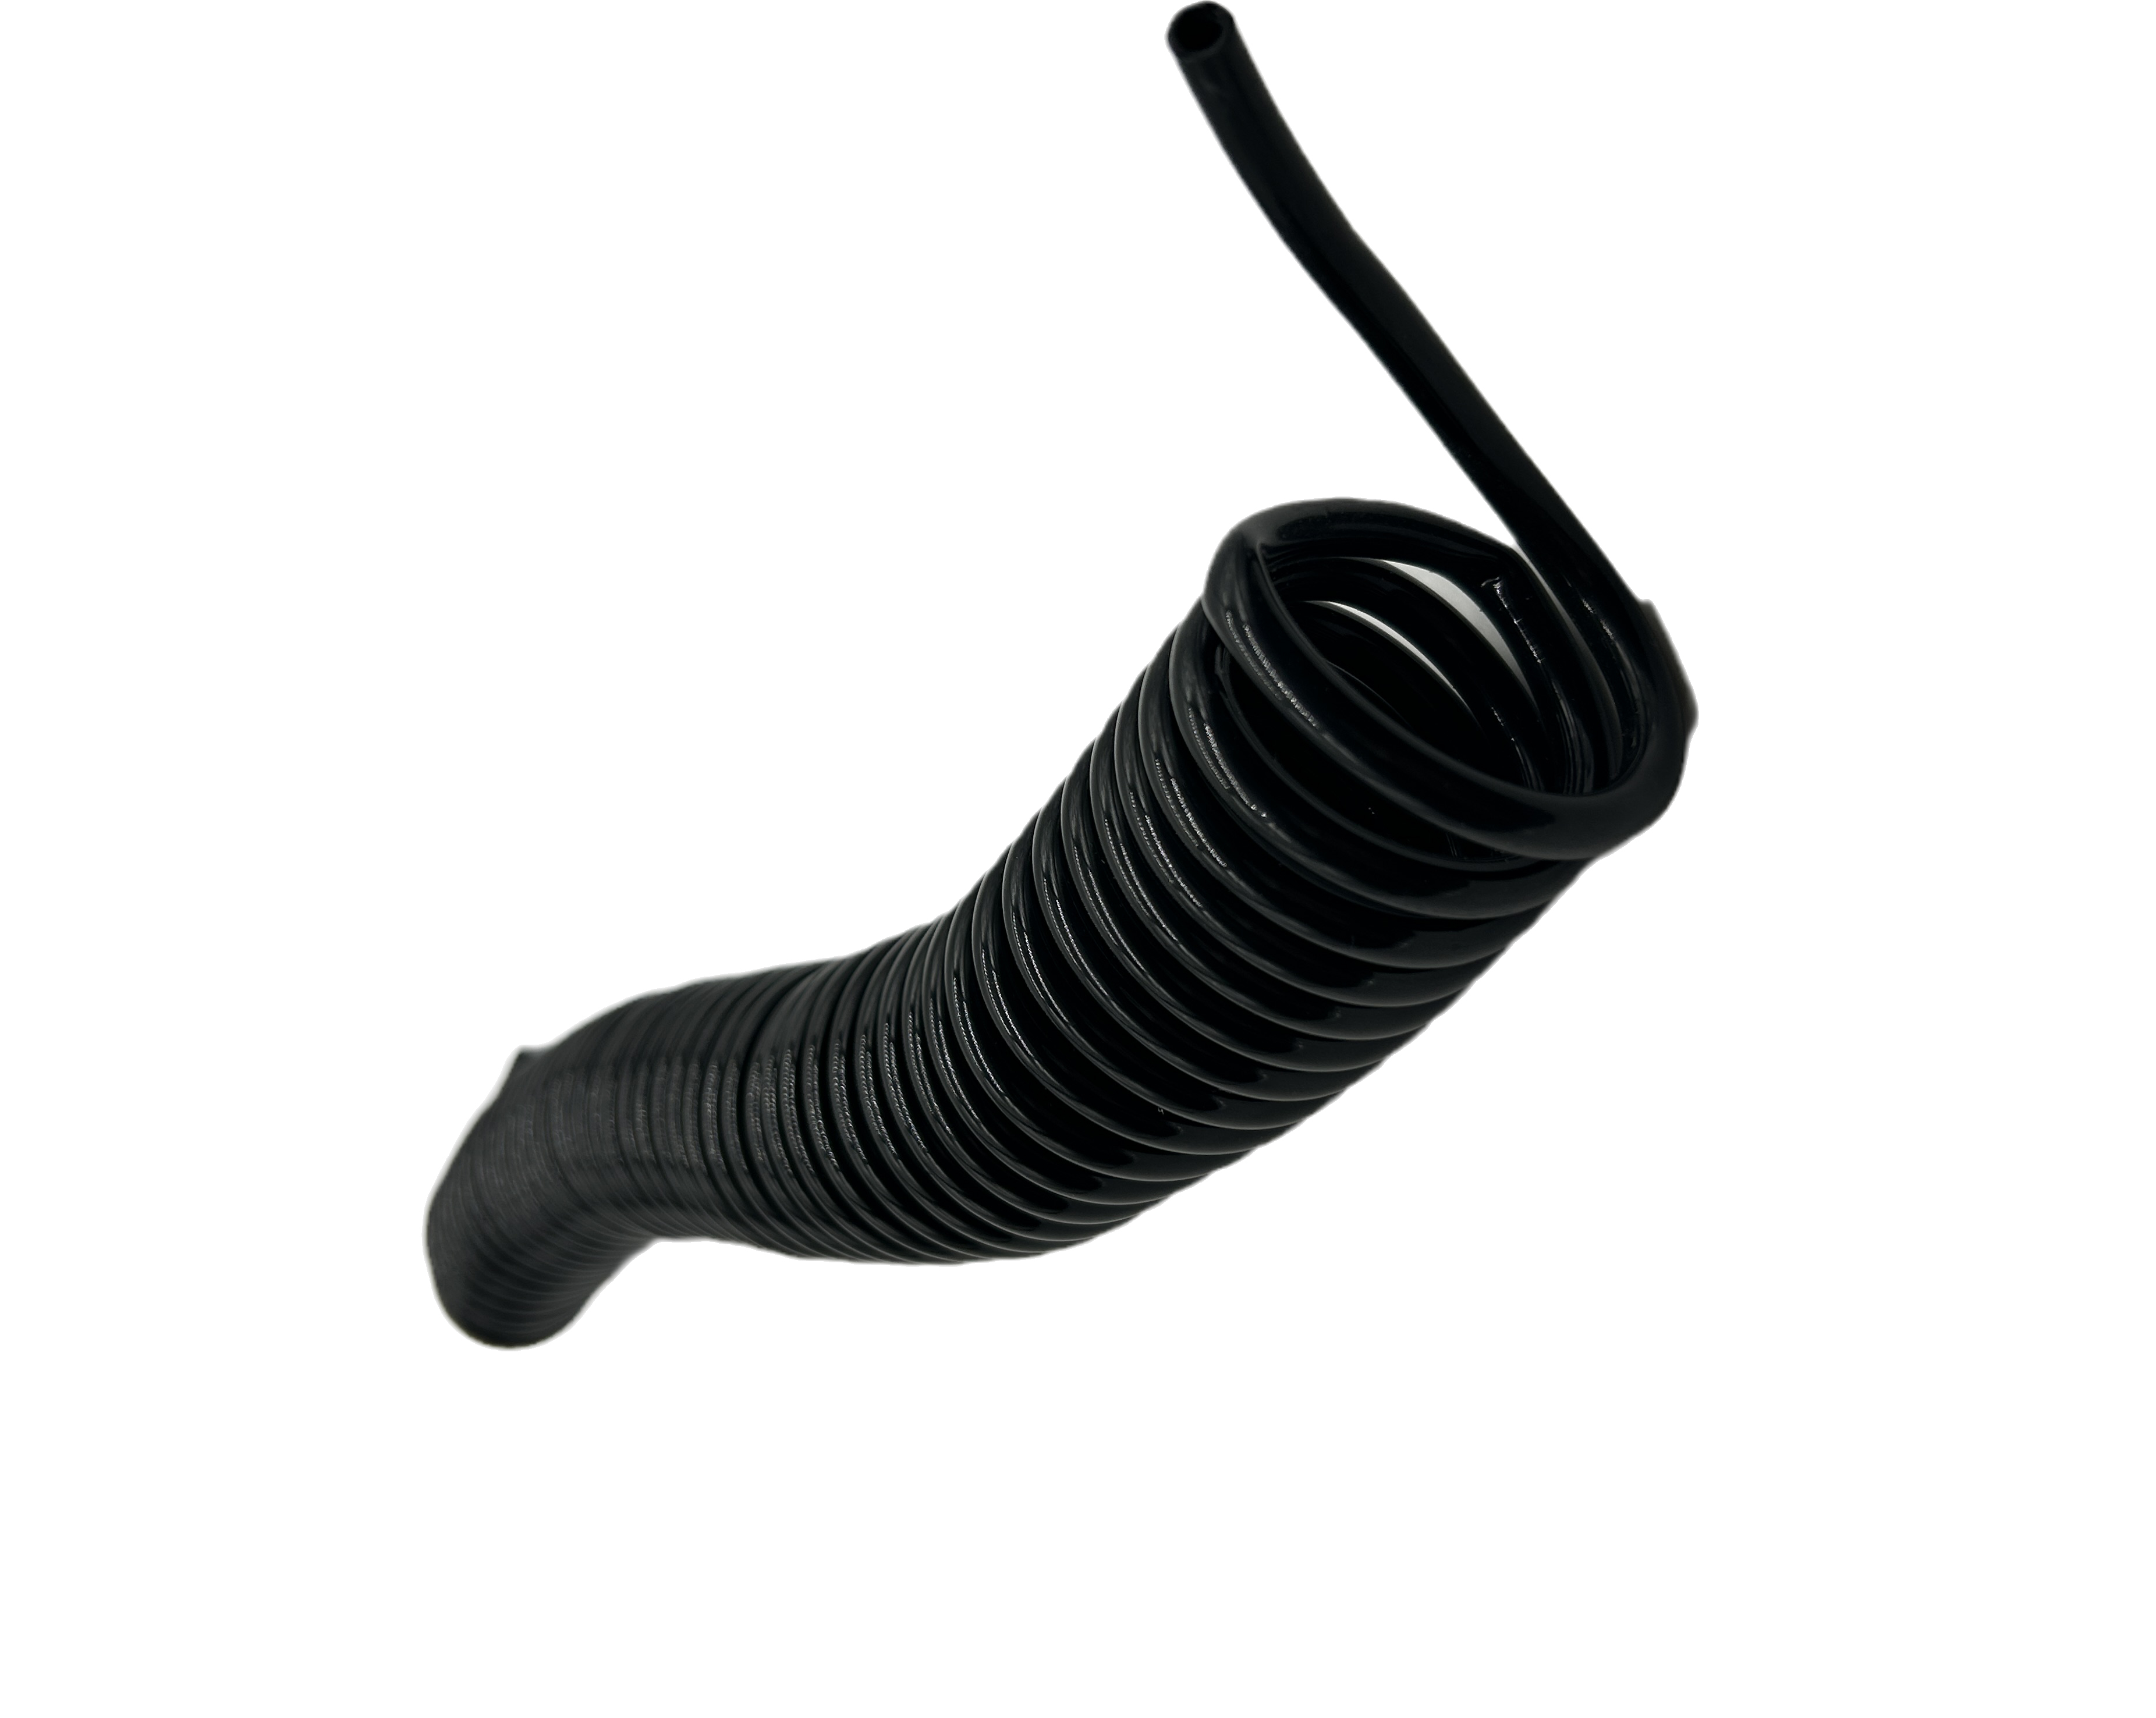 Pu tube black spring tube with an outer diameter of 6mm-6 meters and no joints